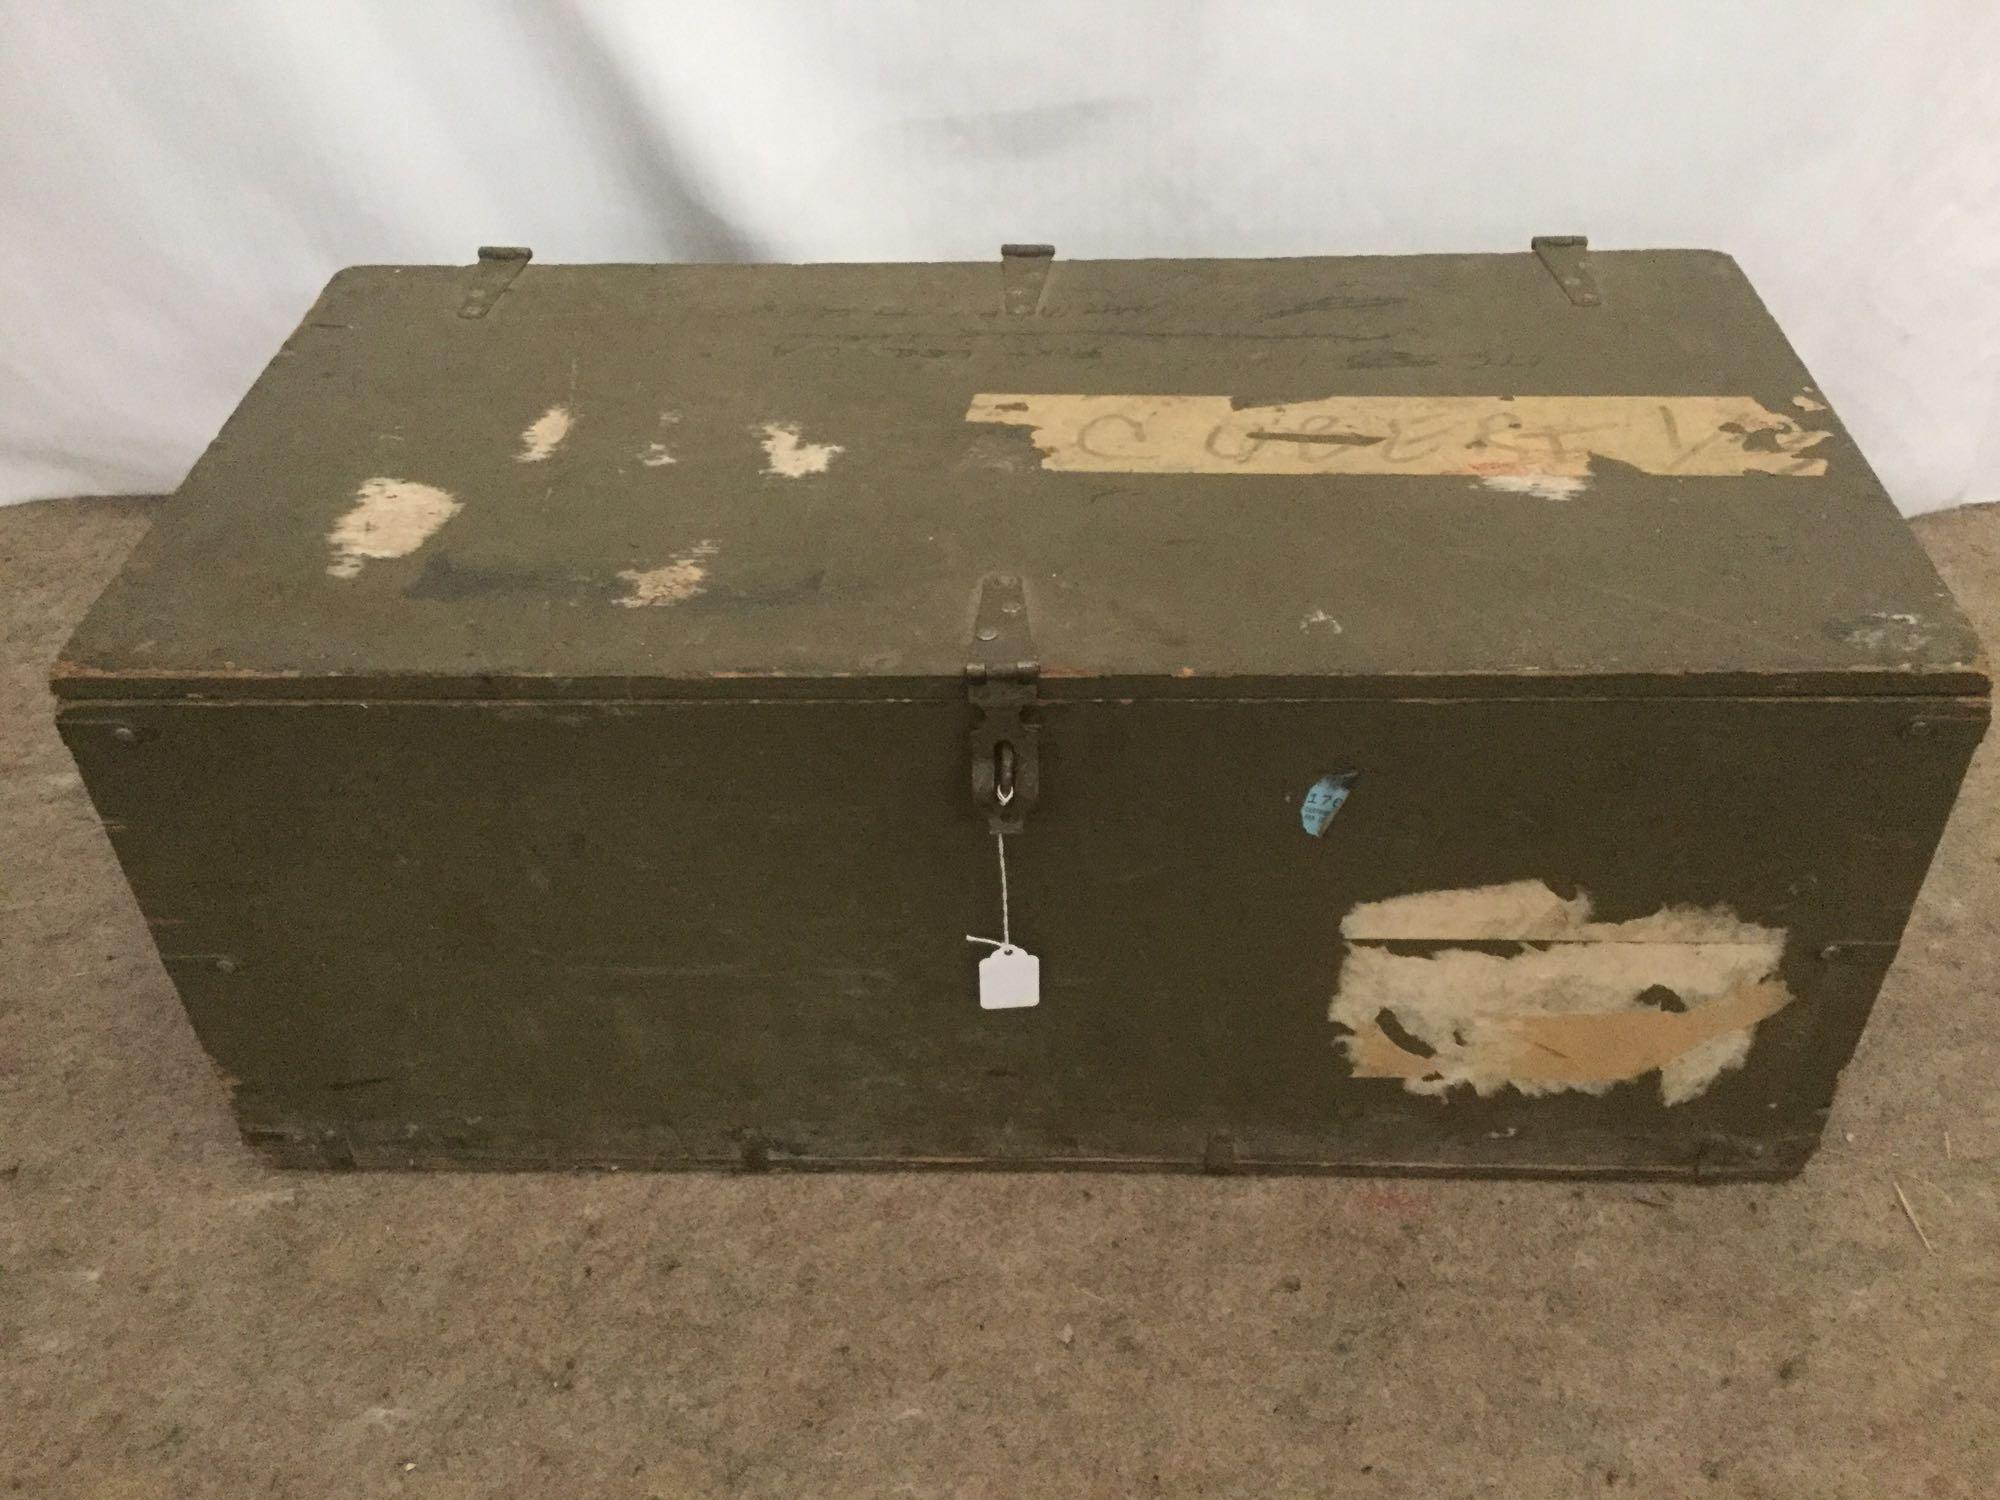 3 vintage green military footlocker storage trunks incl. 1 1951 Green Bingley trunk and more